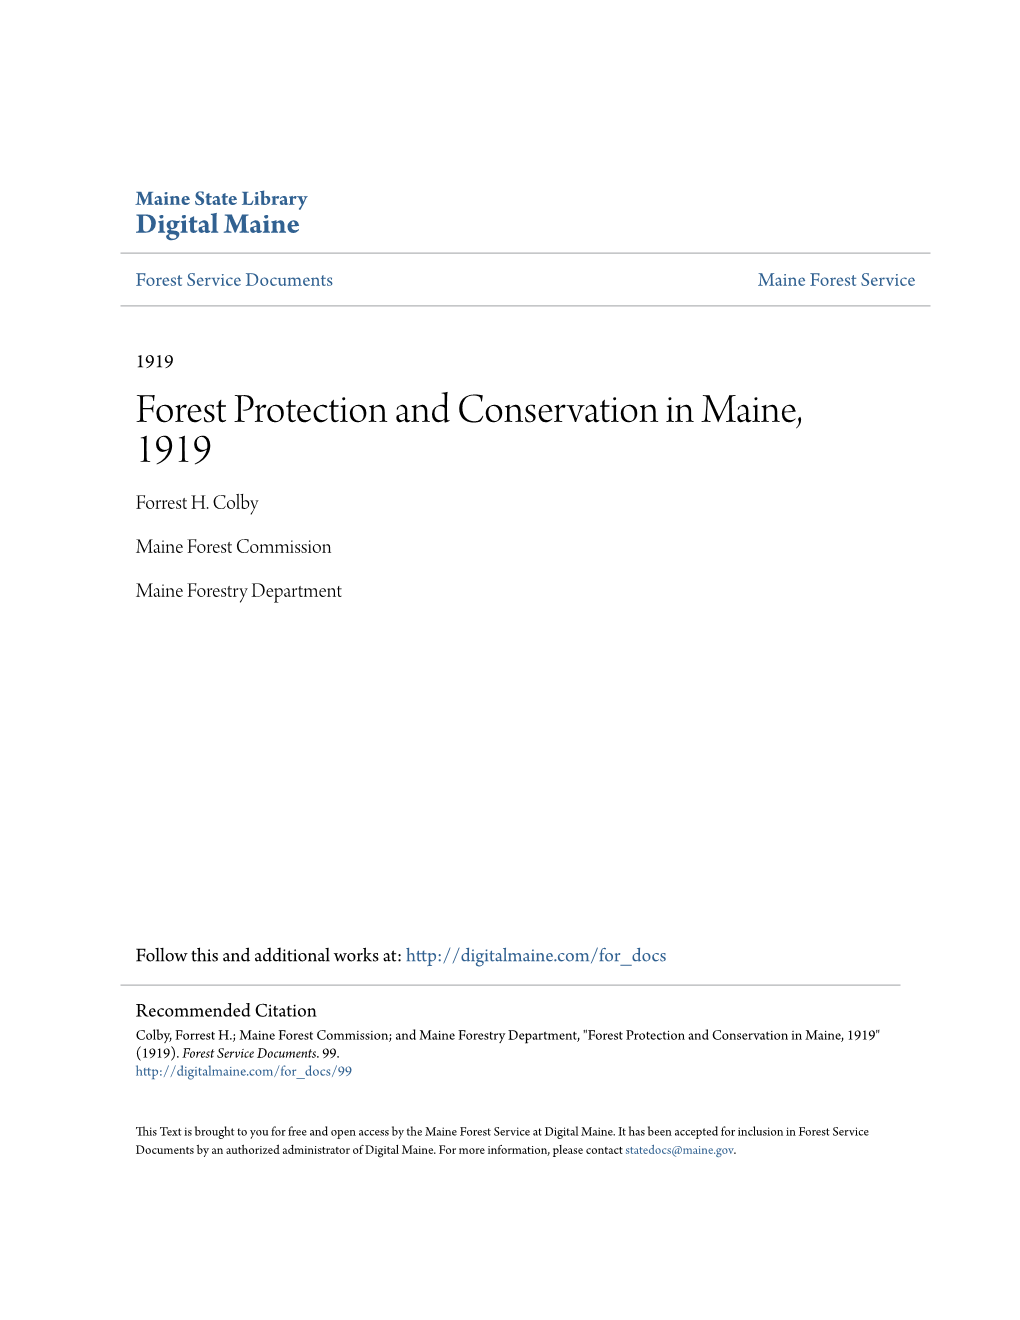 Forest Protection and Conservation in Maine, 1919 Forrest H